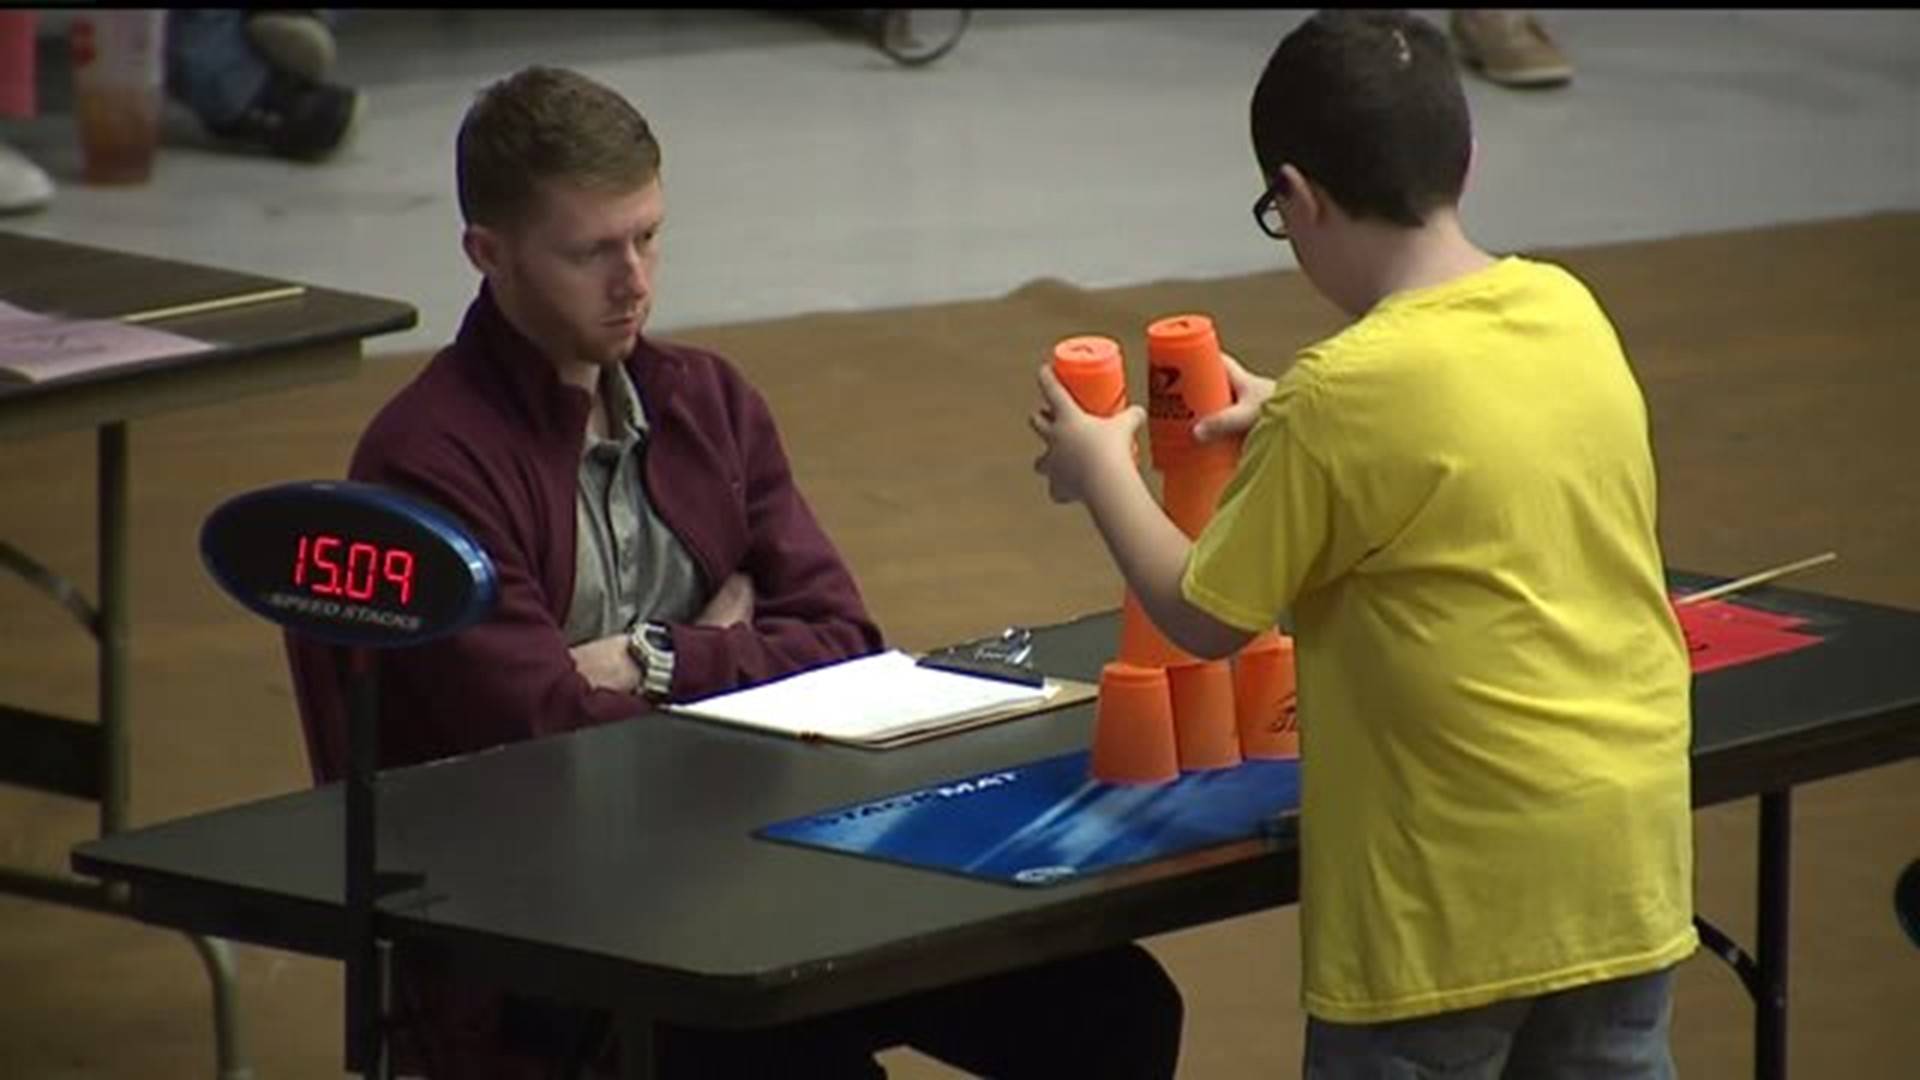 Moline school participates in cupstacking competition